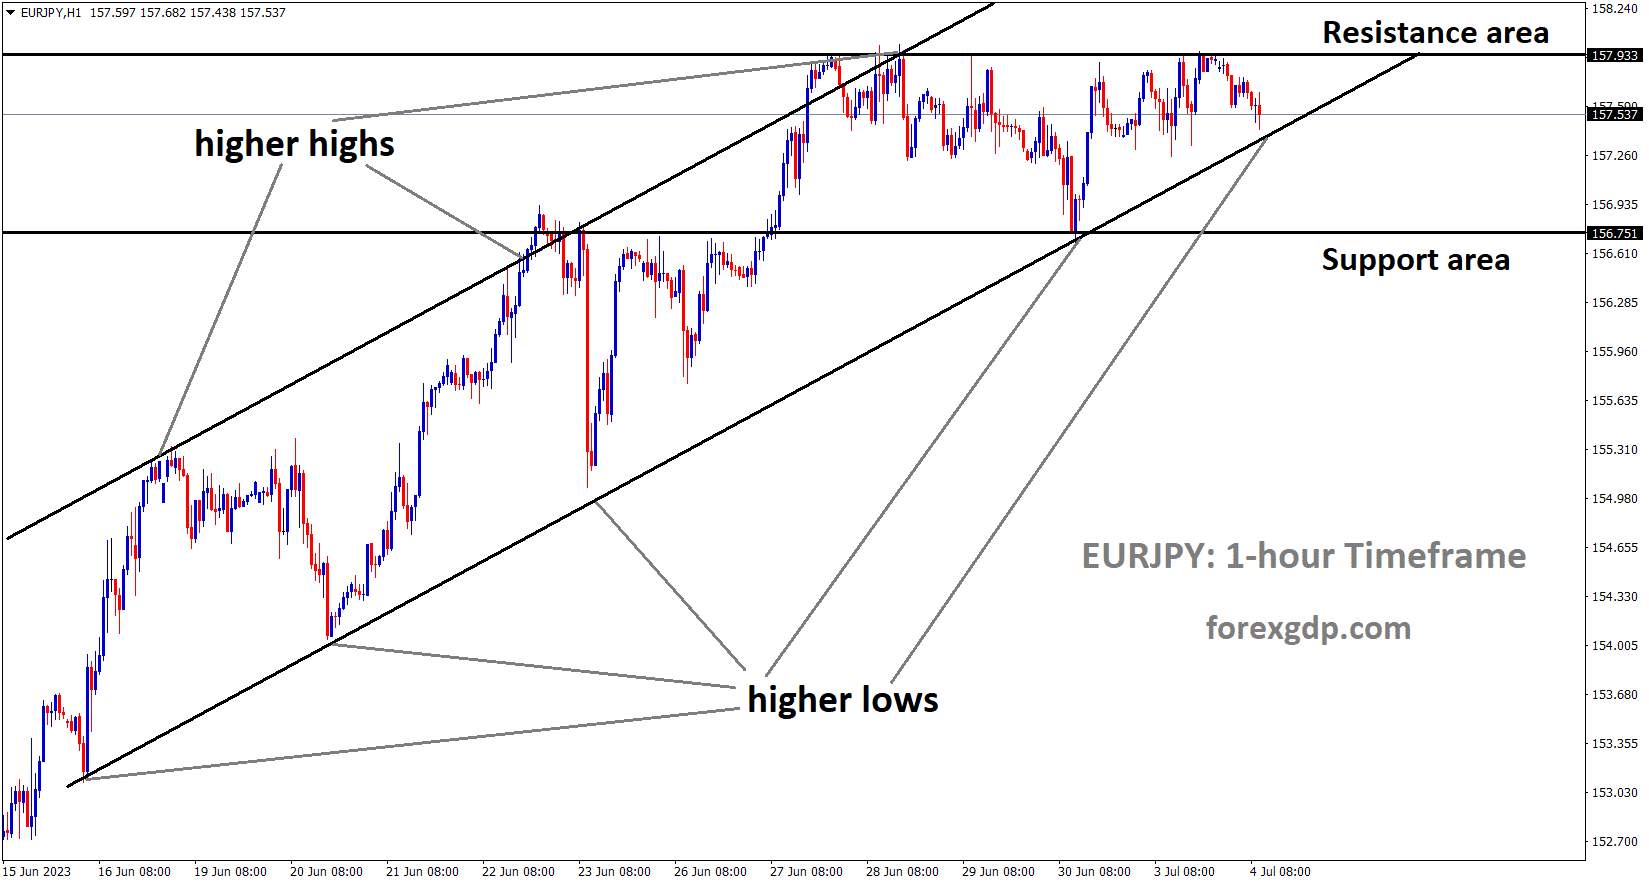 EURJPY is moving in an Ascending Channel and the market has reached the higher low area of the channel